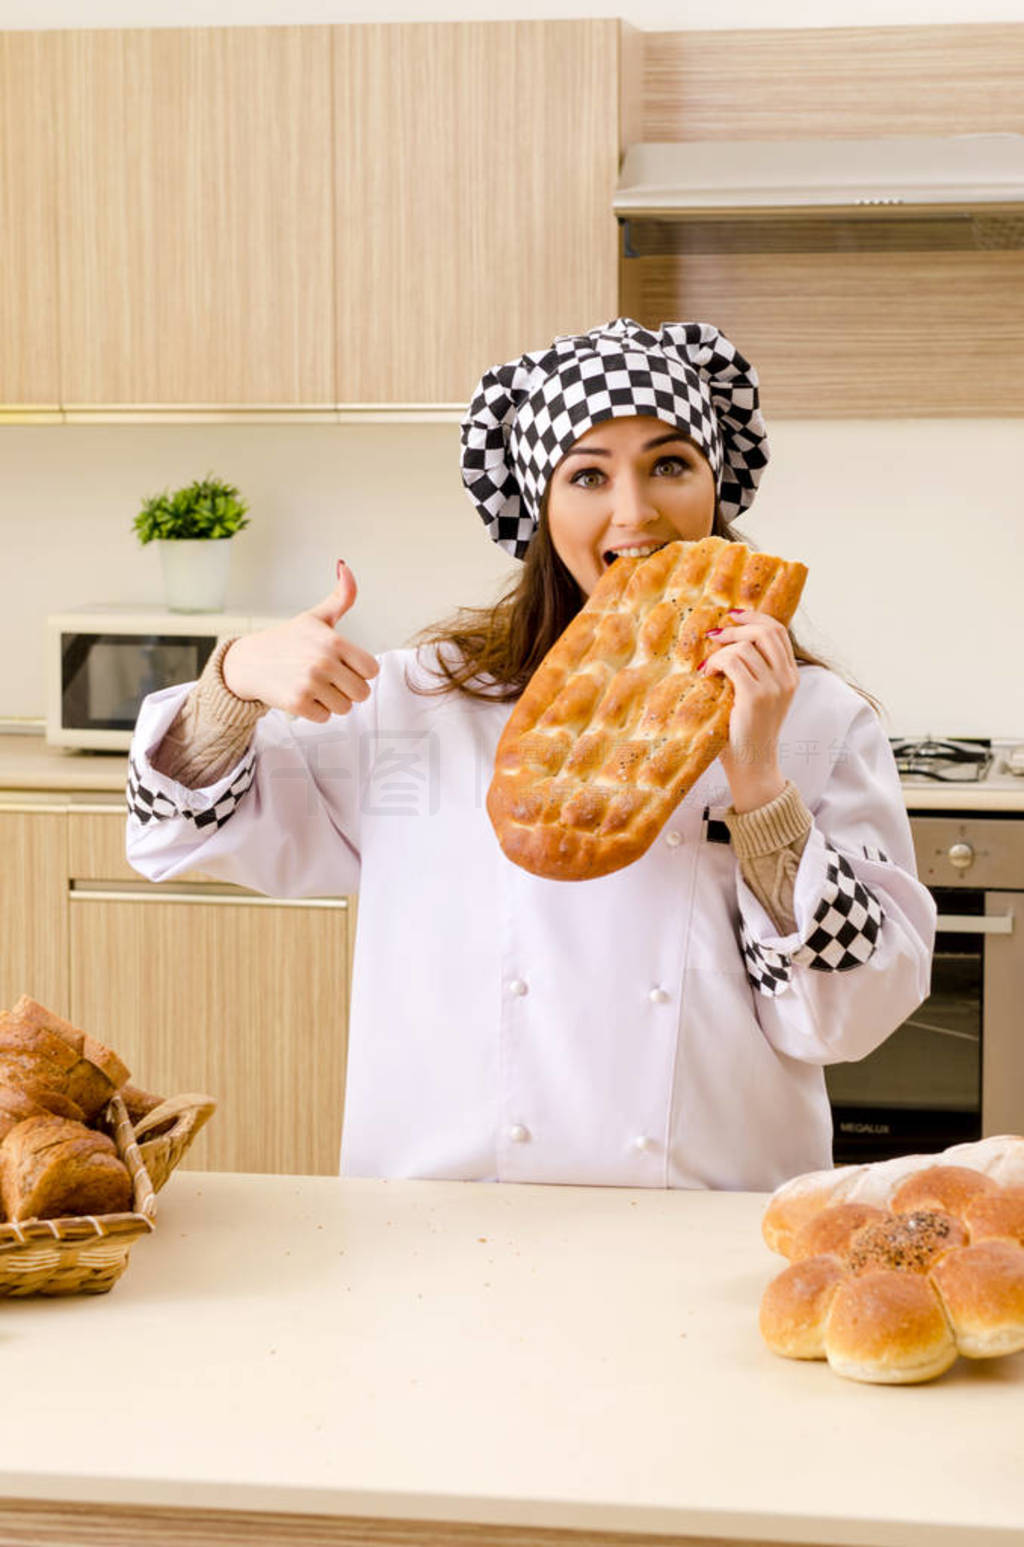 Young female baker working in kitchen